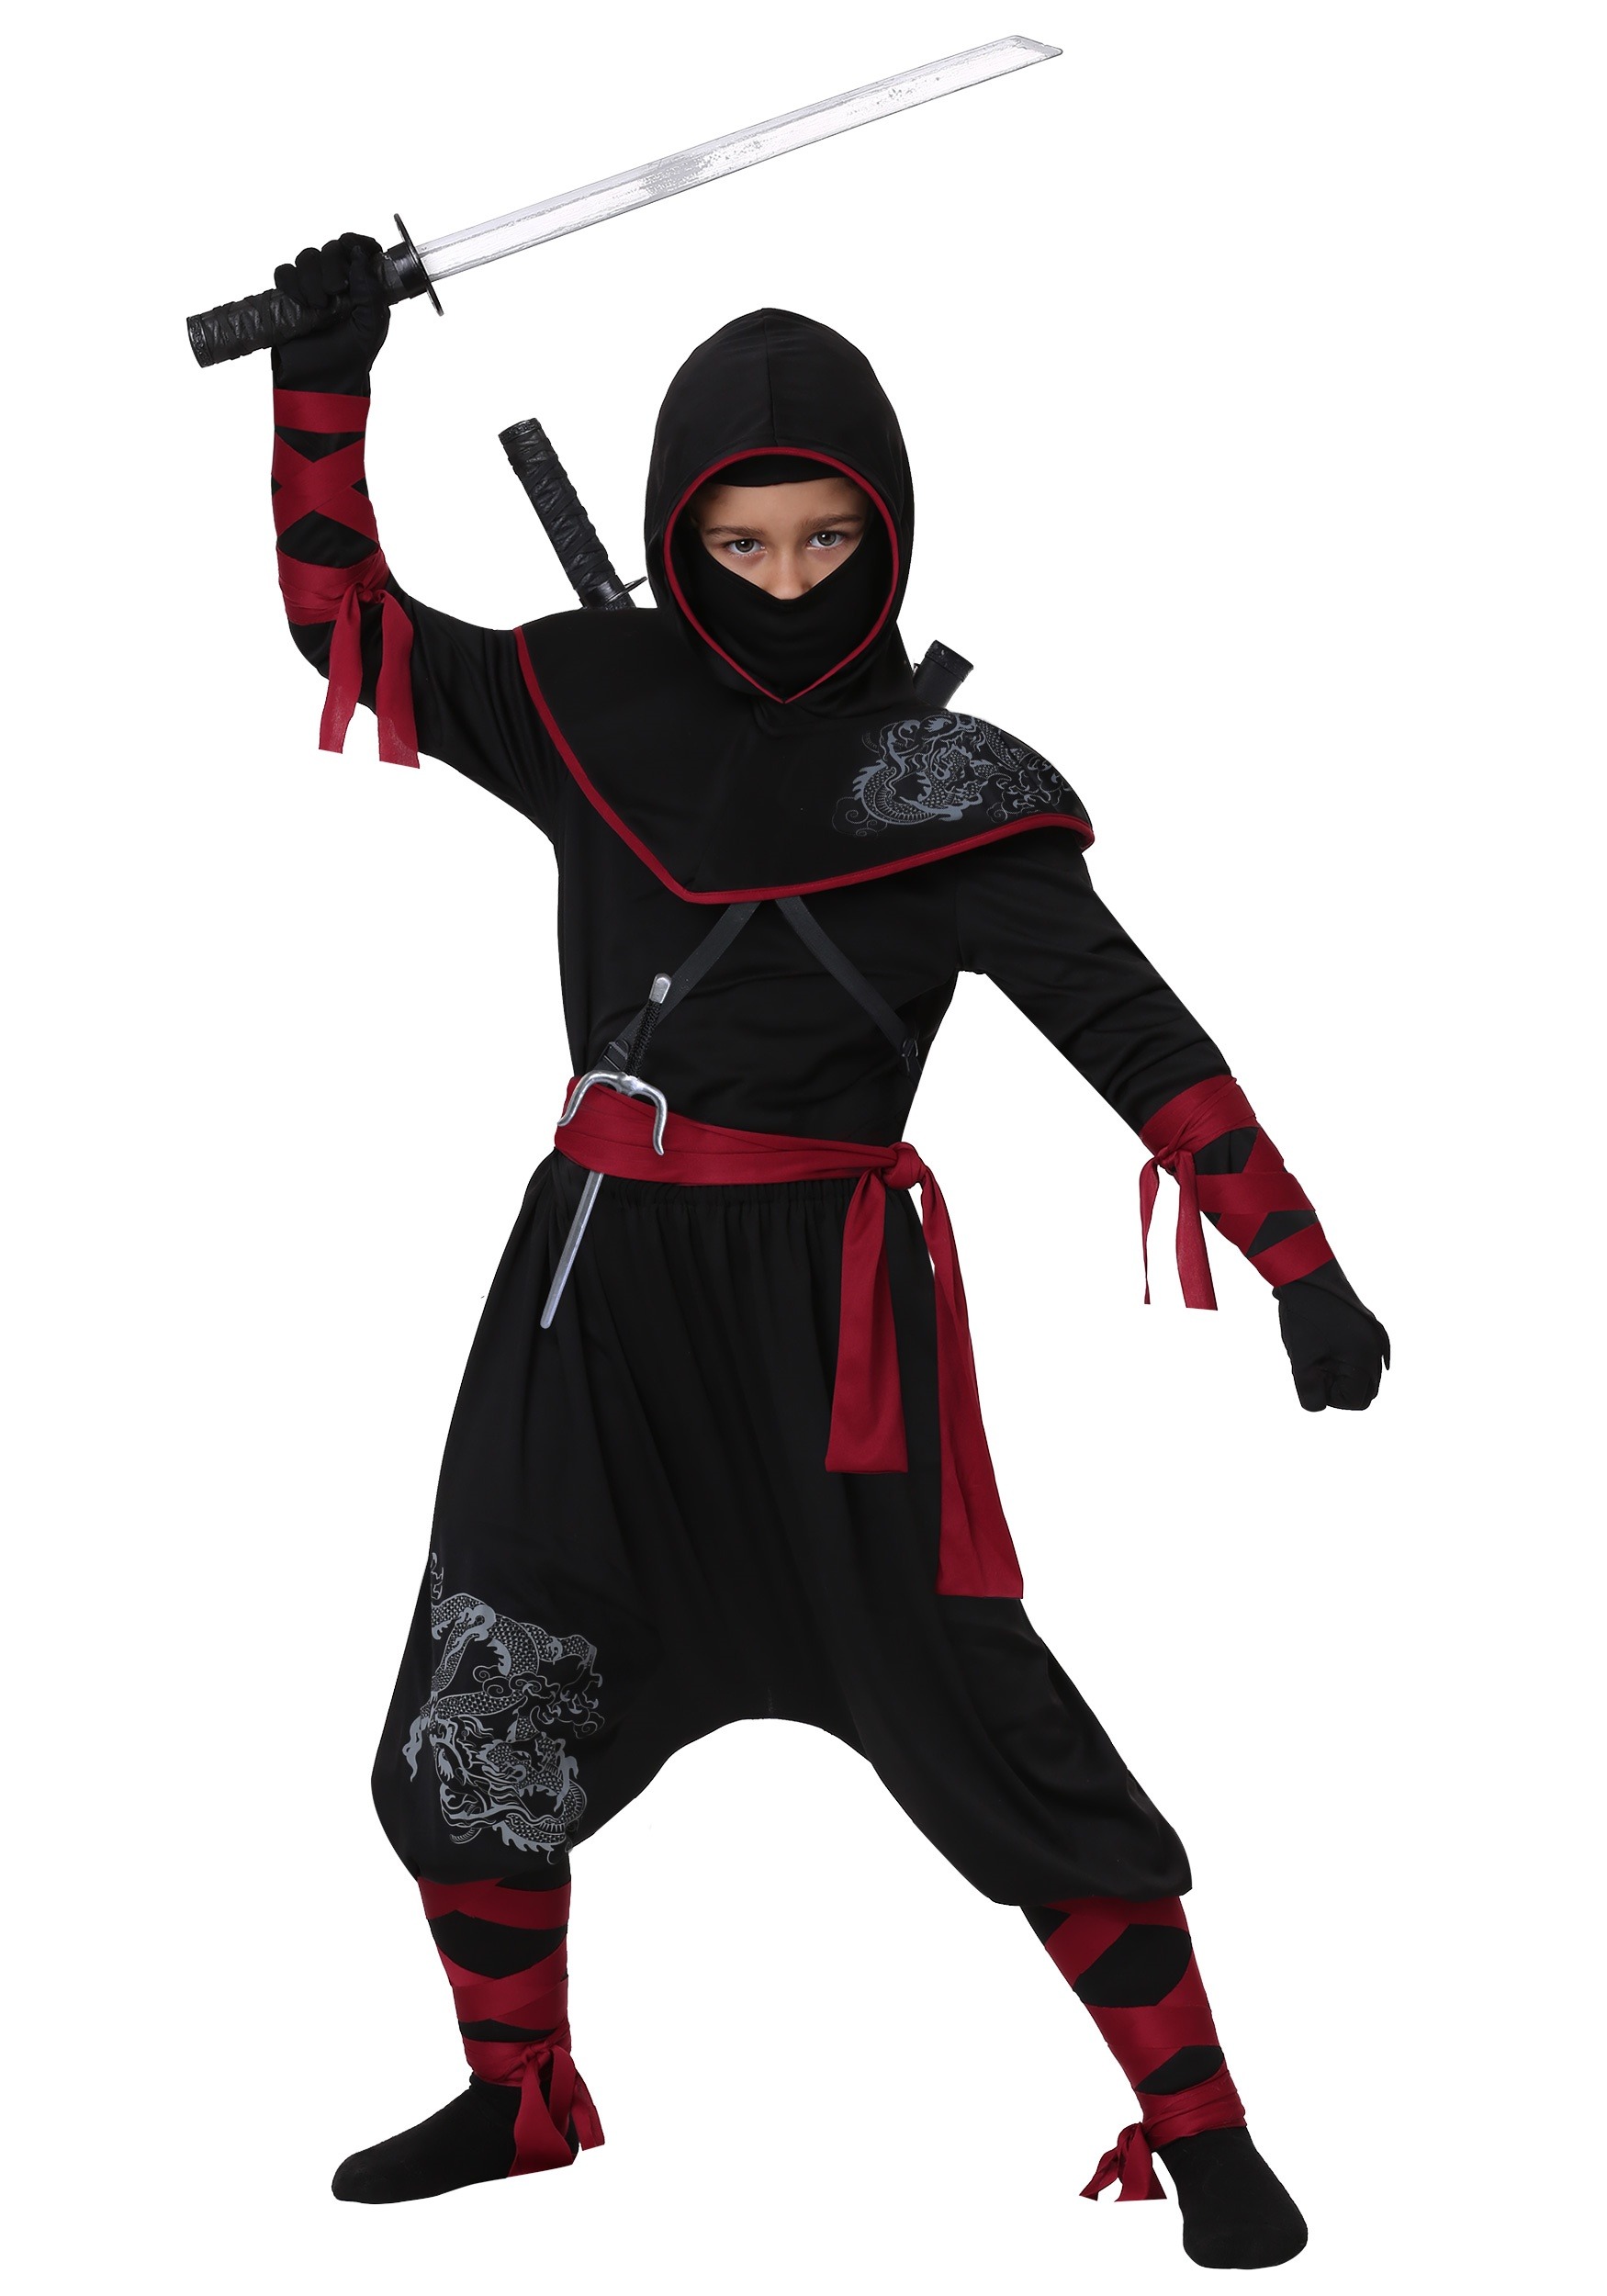 https://images.halloweencostumes.ca/products/44462/1-1/deadly-ninja-costume-for-boys.jpg